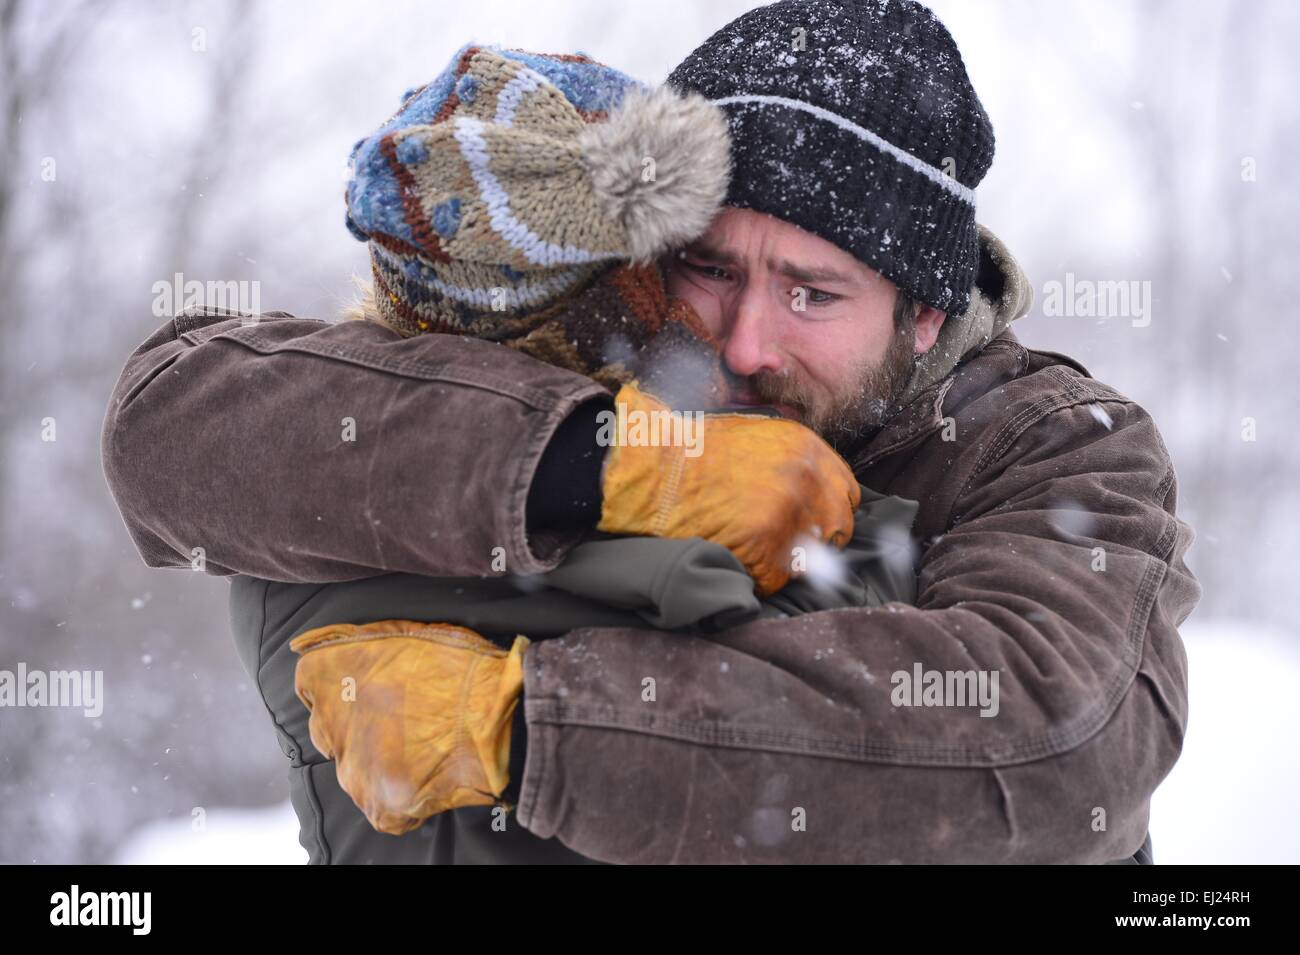 Will Atom Egoyan's “The Captive” be a career rebirth for both him